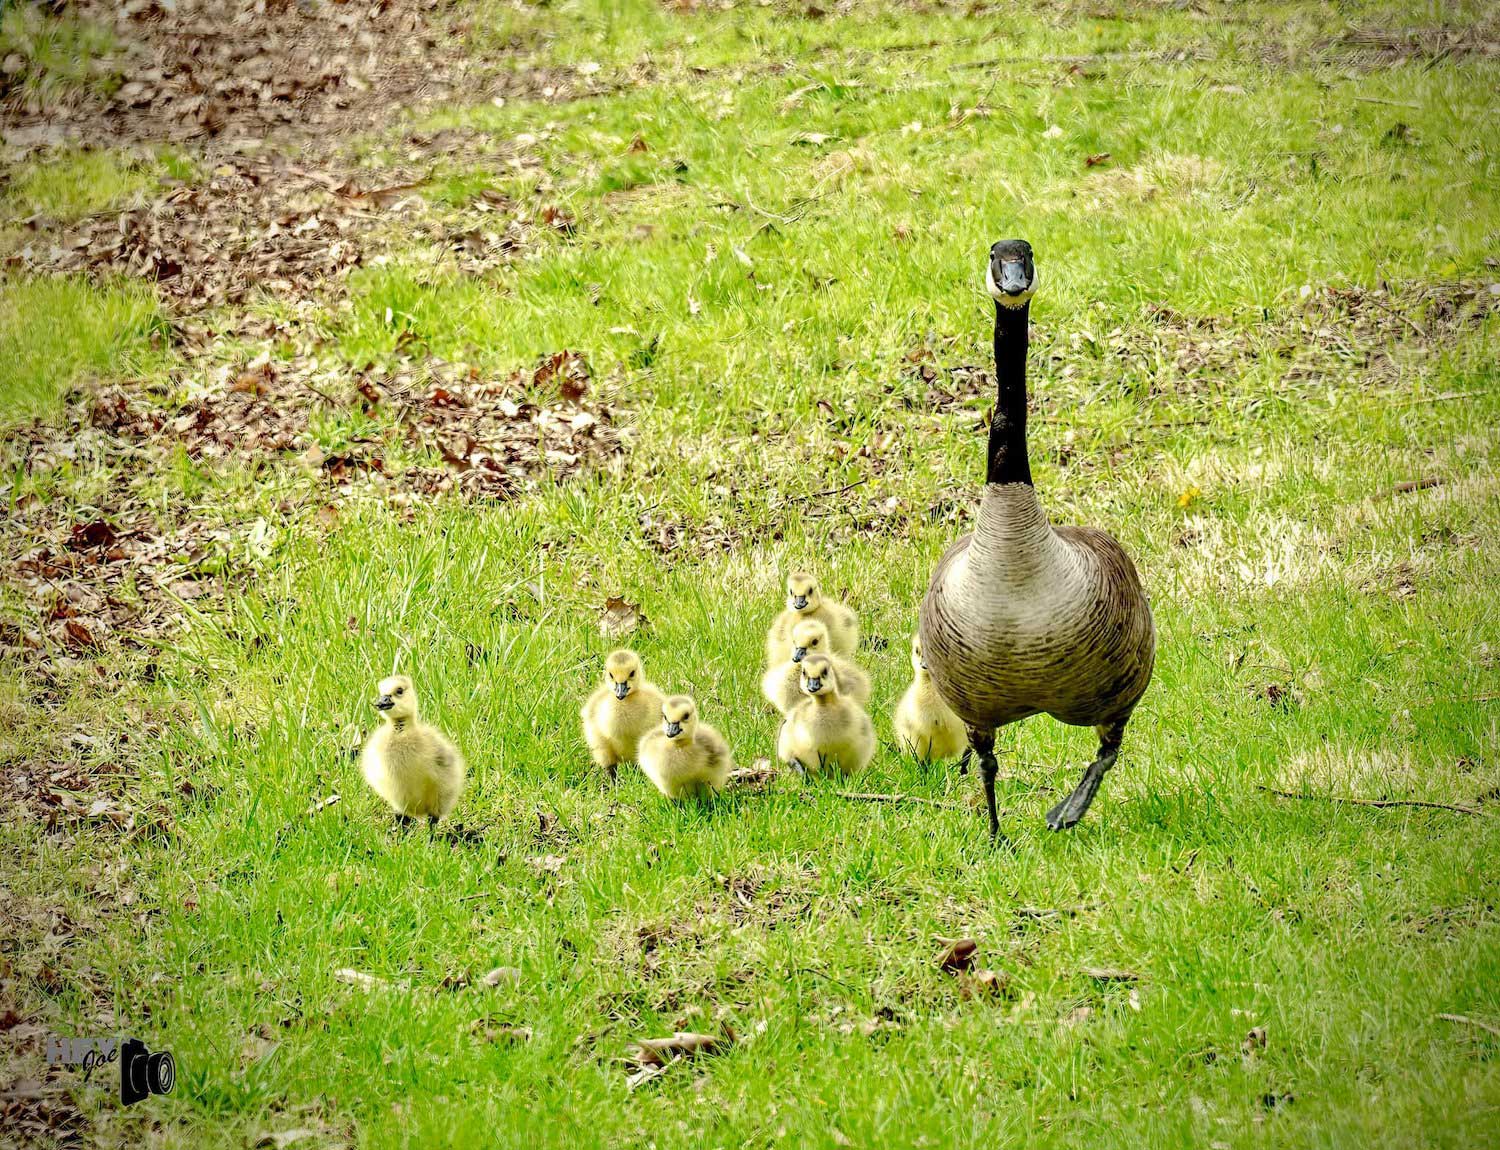 A Canado goose walking in the grass with seven goslings.